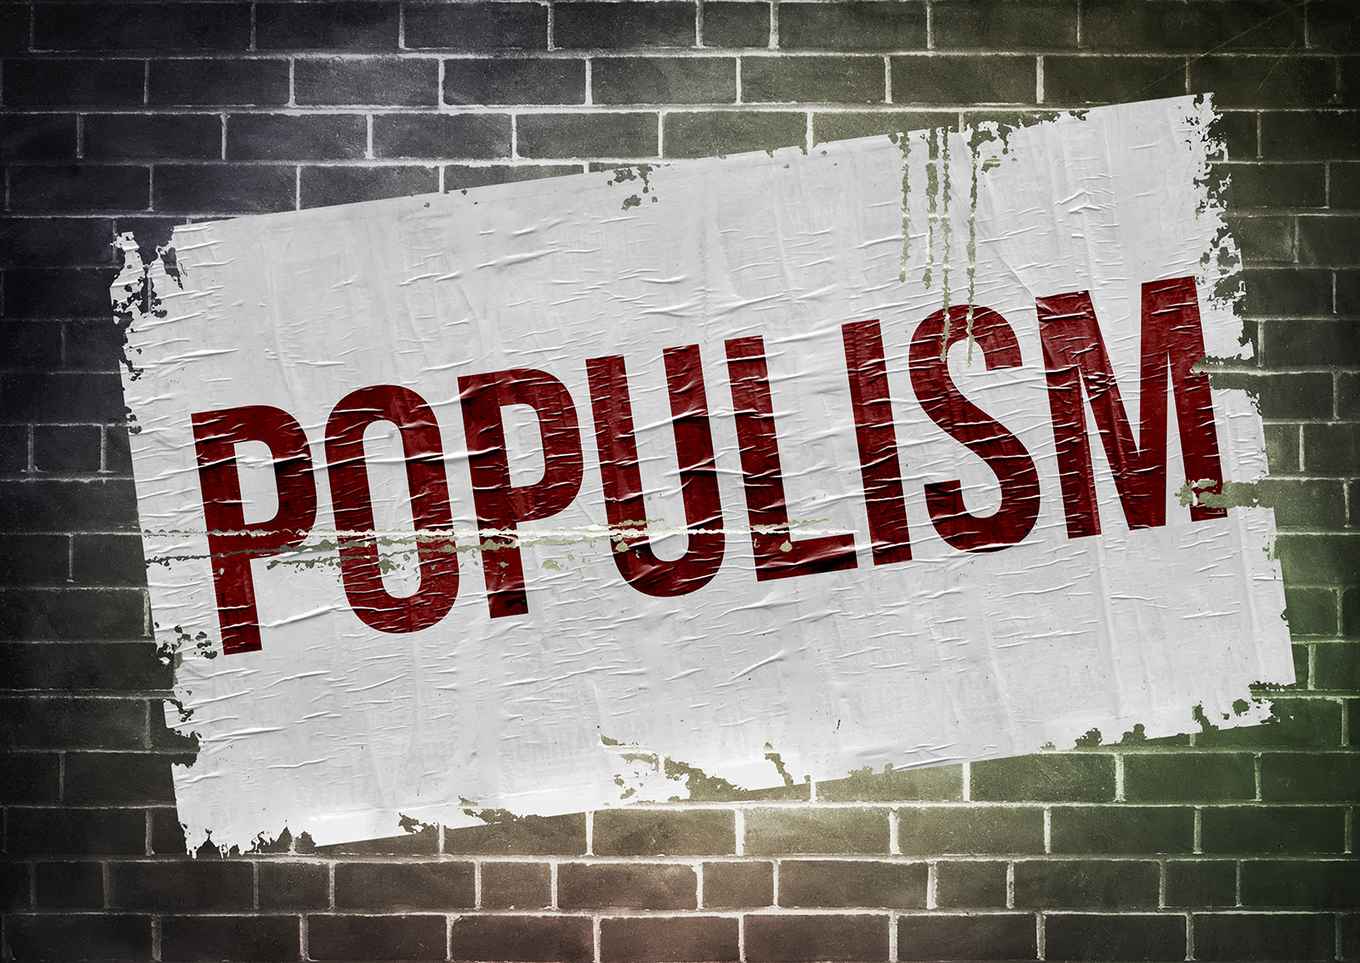 wallpainting with the word 'populism'